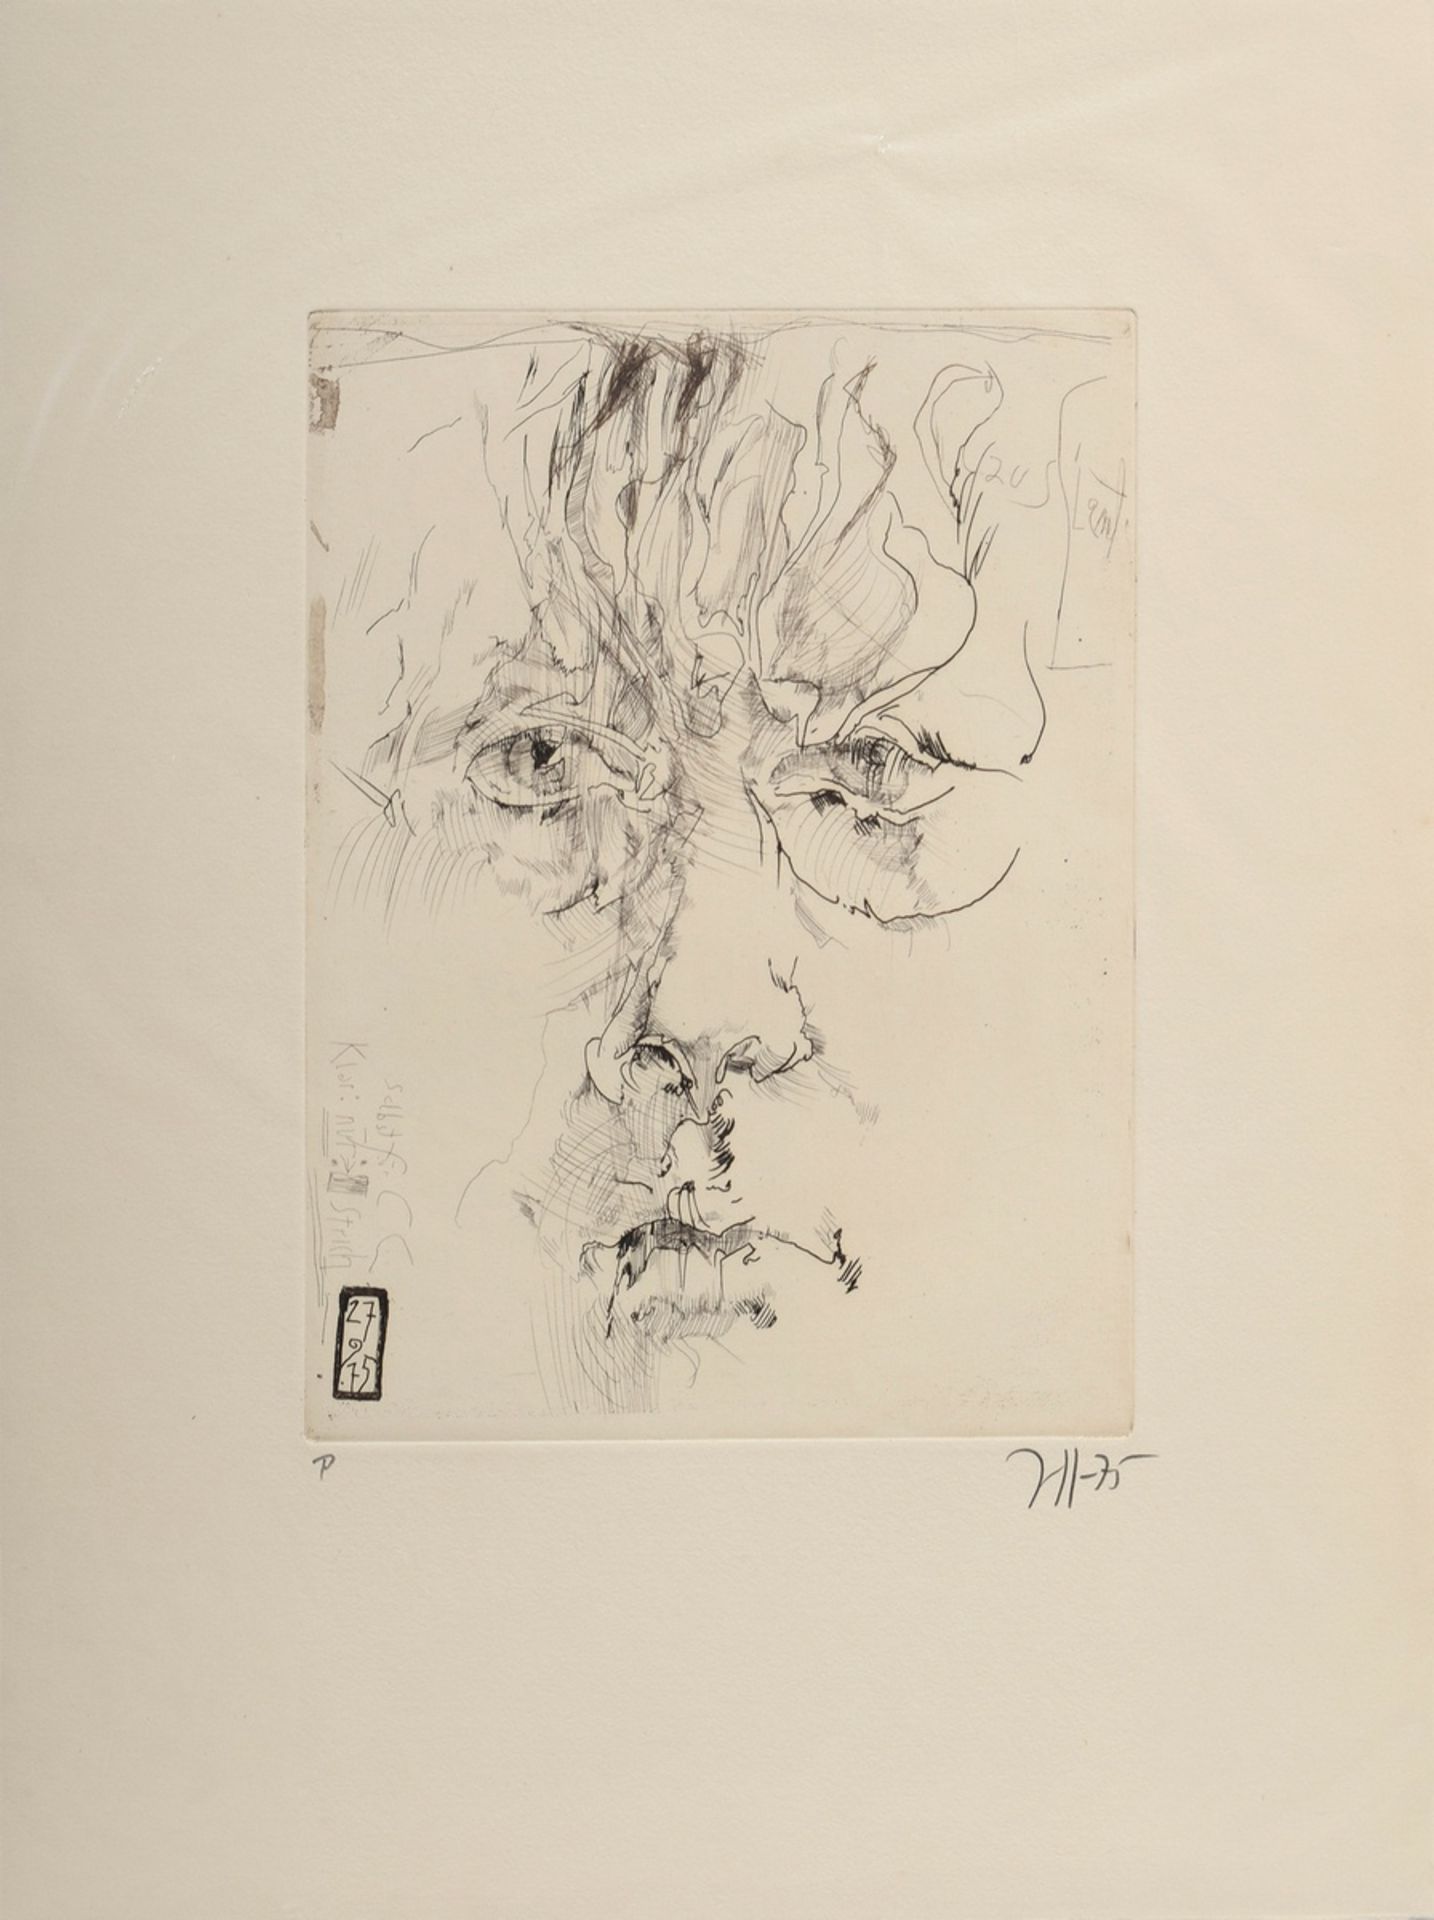 Janssen, Horst (1929-1995) " Self for CC" 1975, etching, sample, titled and dated on the plate, and